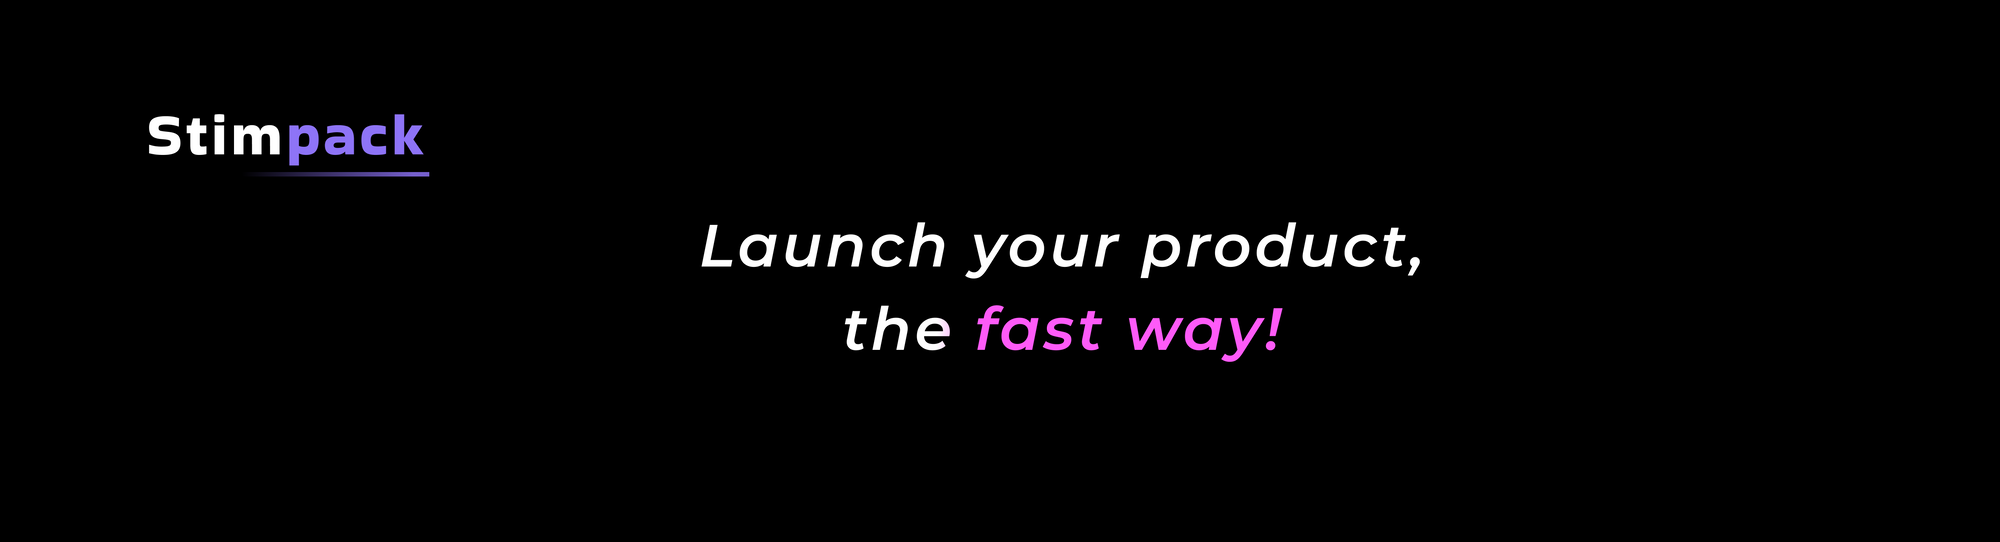 Stimpack, gain early traction, launch products fast